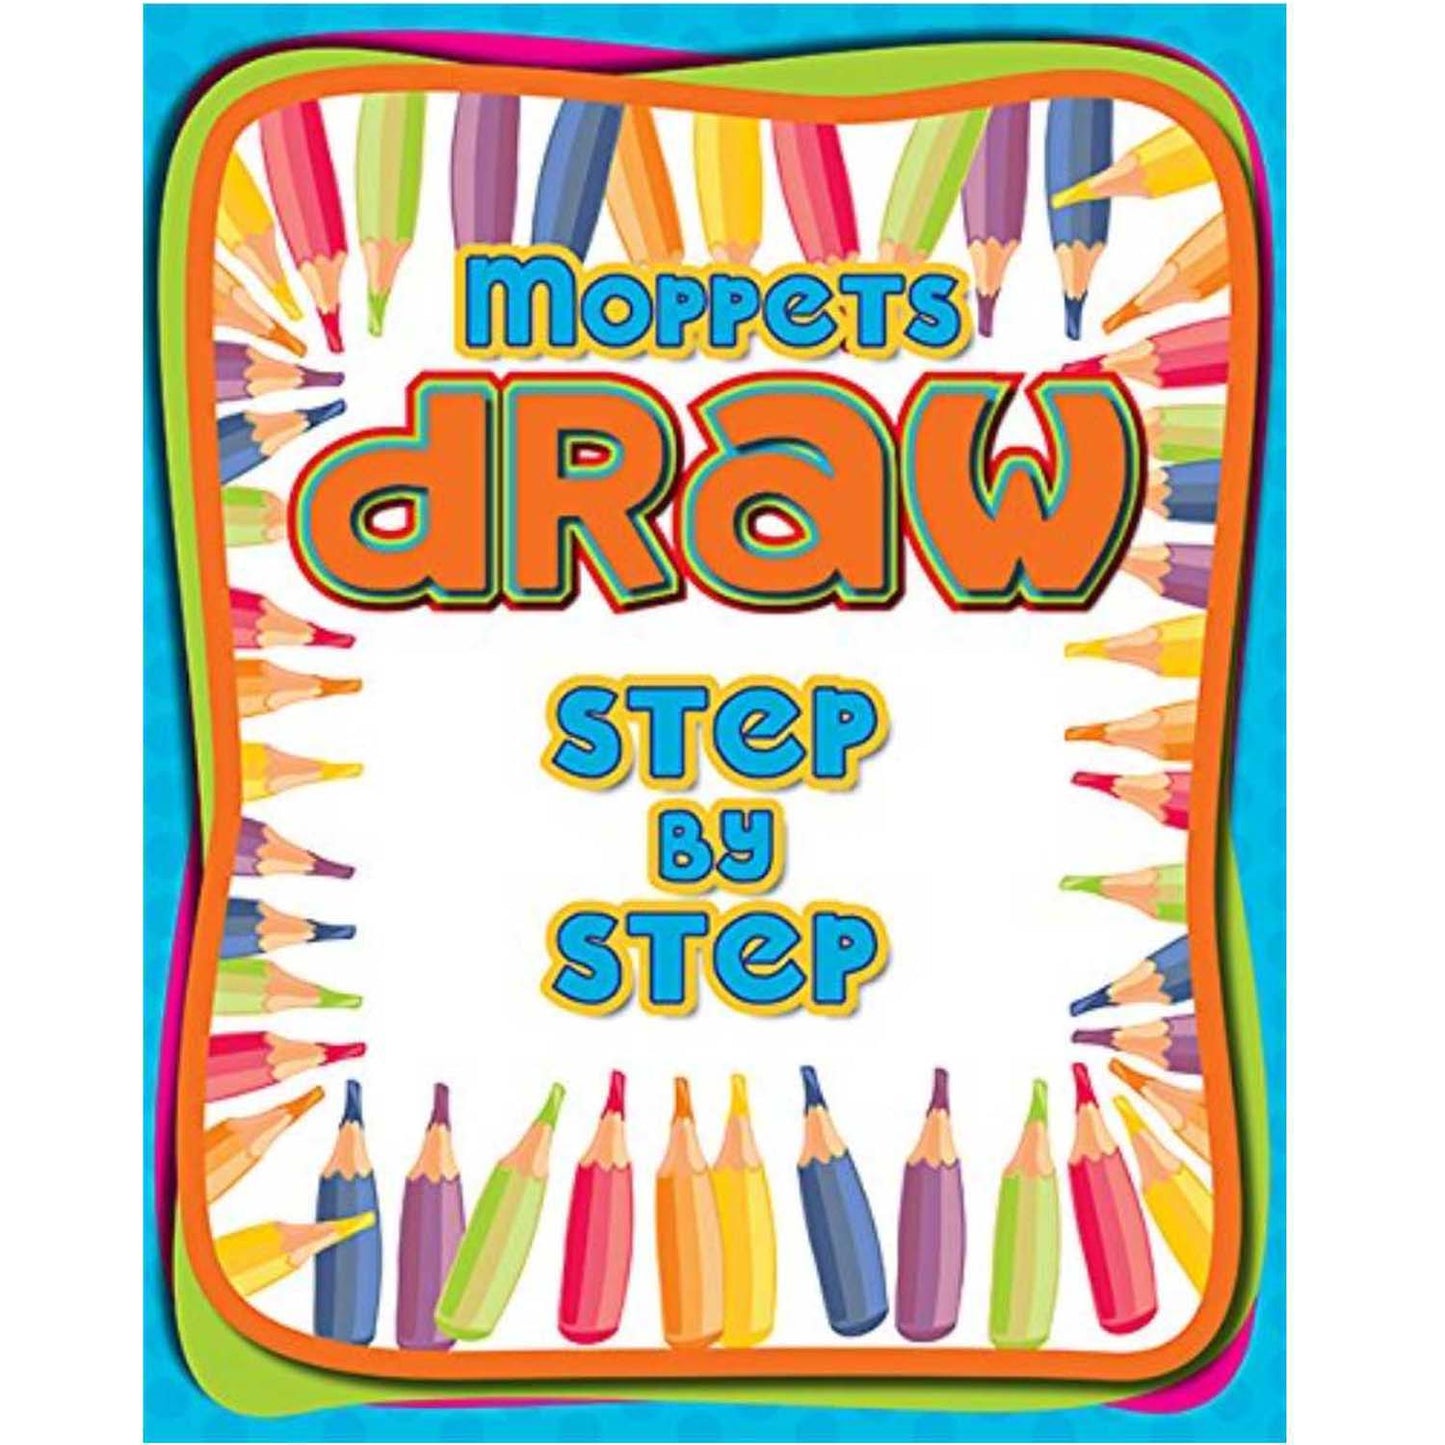 Step by Step - II Moppets Draw Series